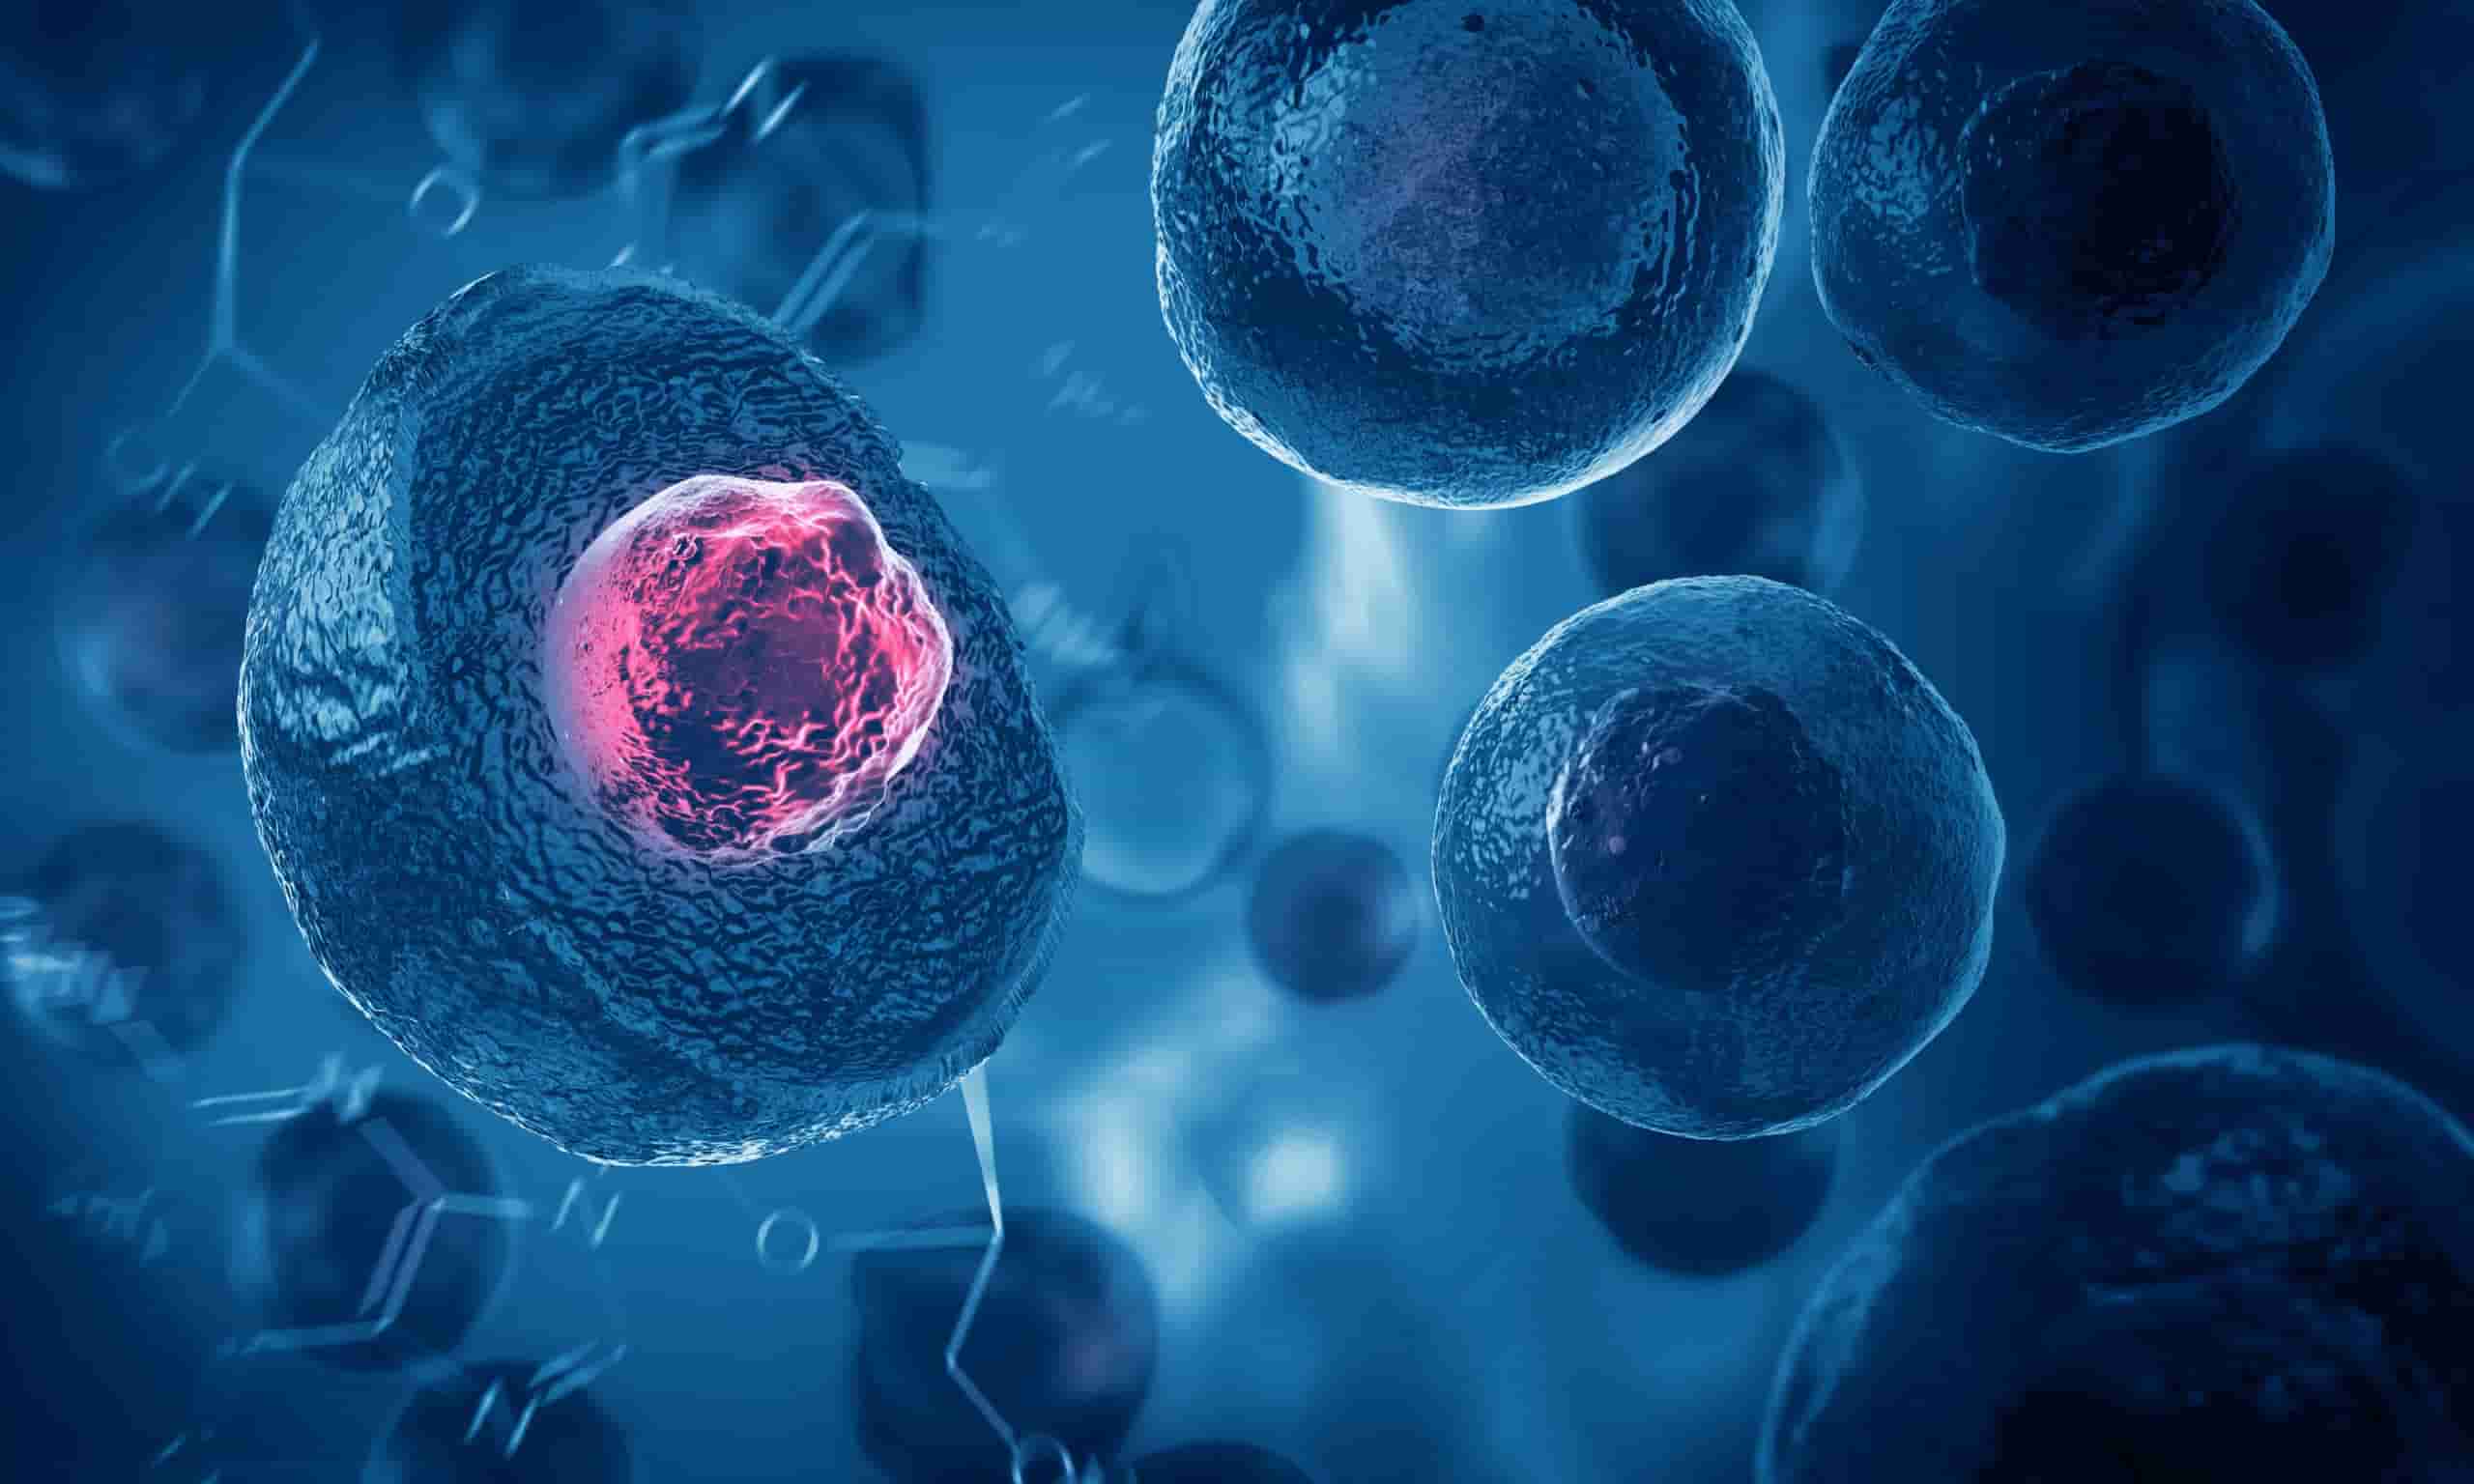 But What Exactly Is Stem Cell Therapy?